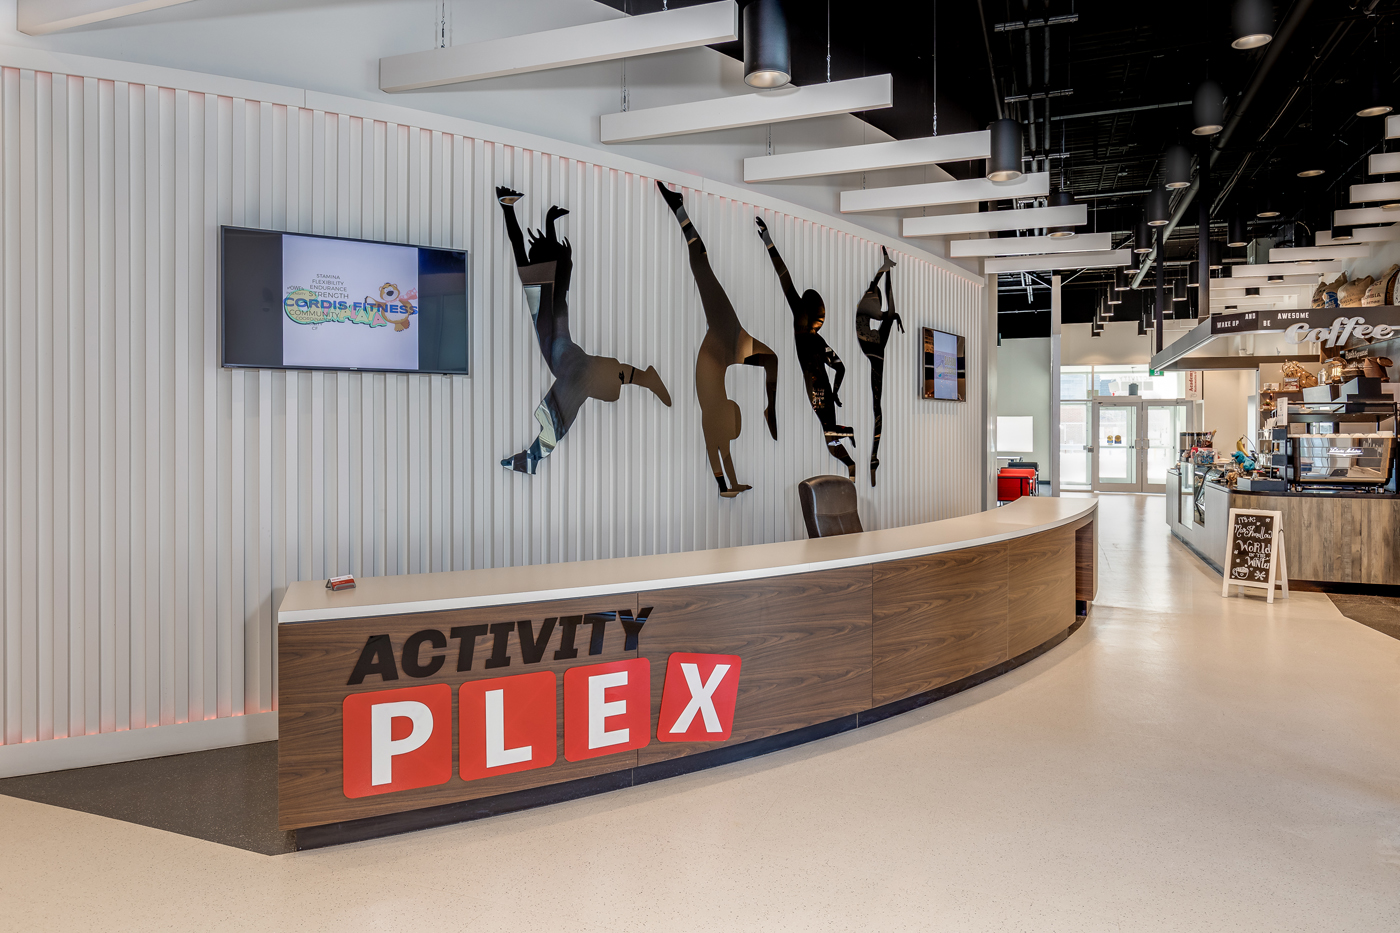 view from inside of Activity Plex